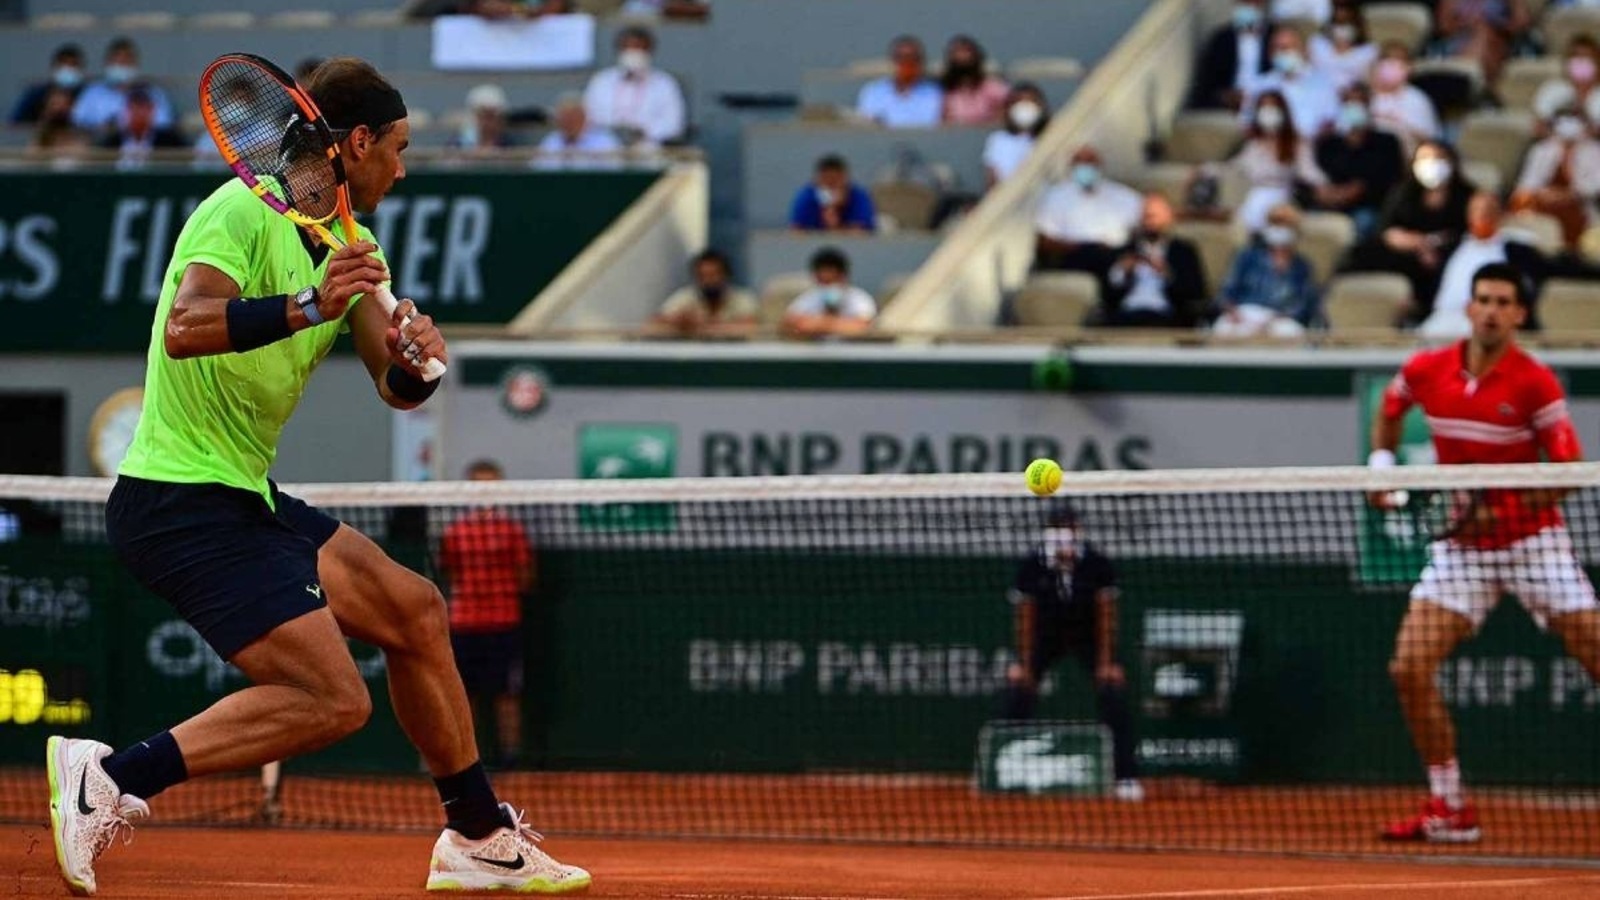 French Open 2022 quarterfinal What does Nadal need to do to beat Djokovic? Tennis News